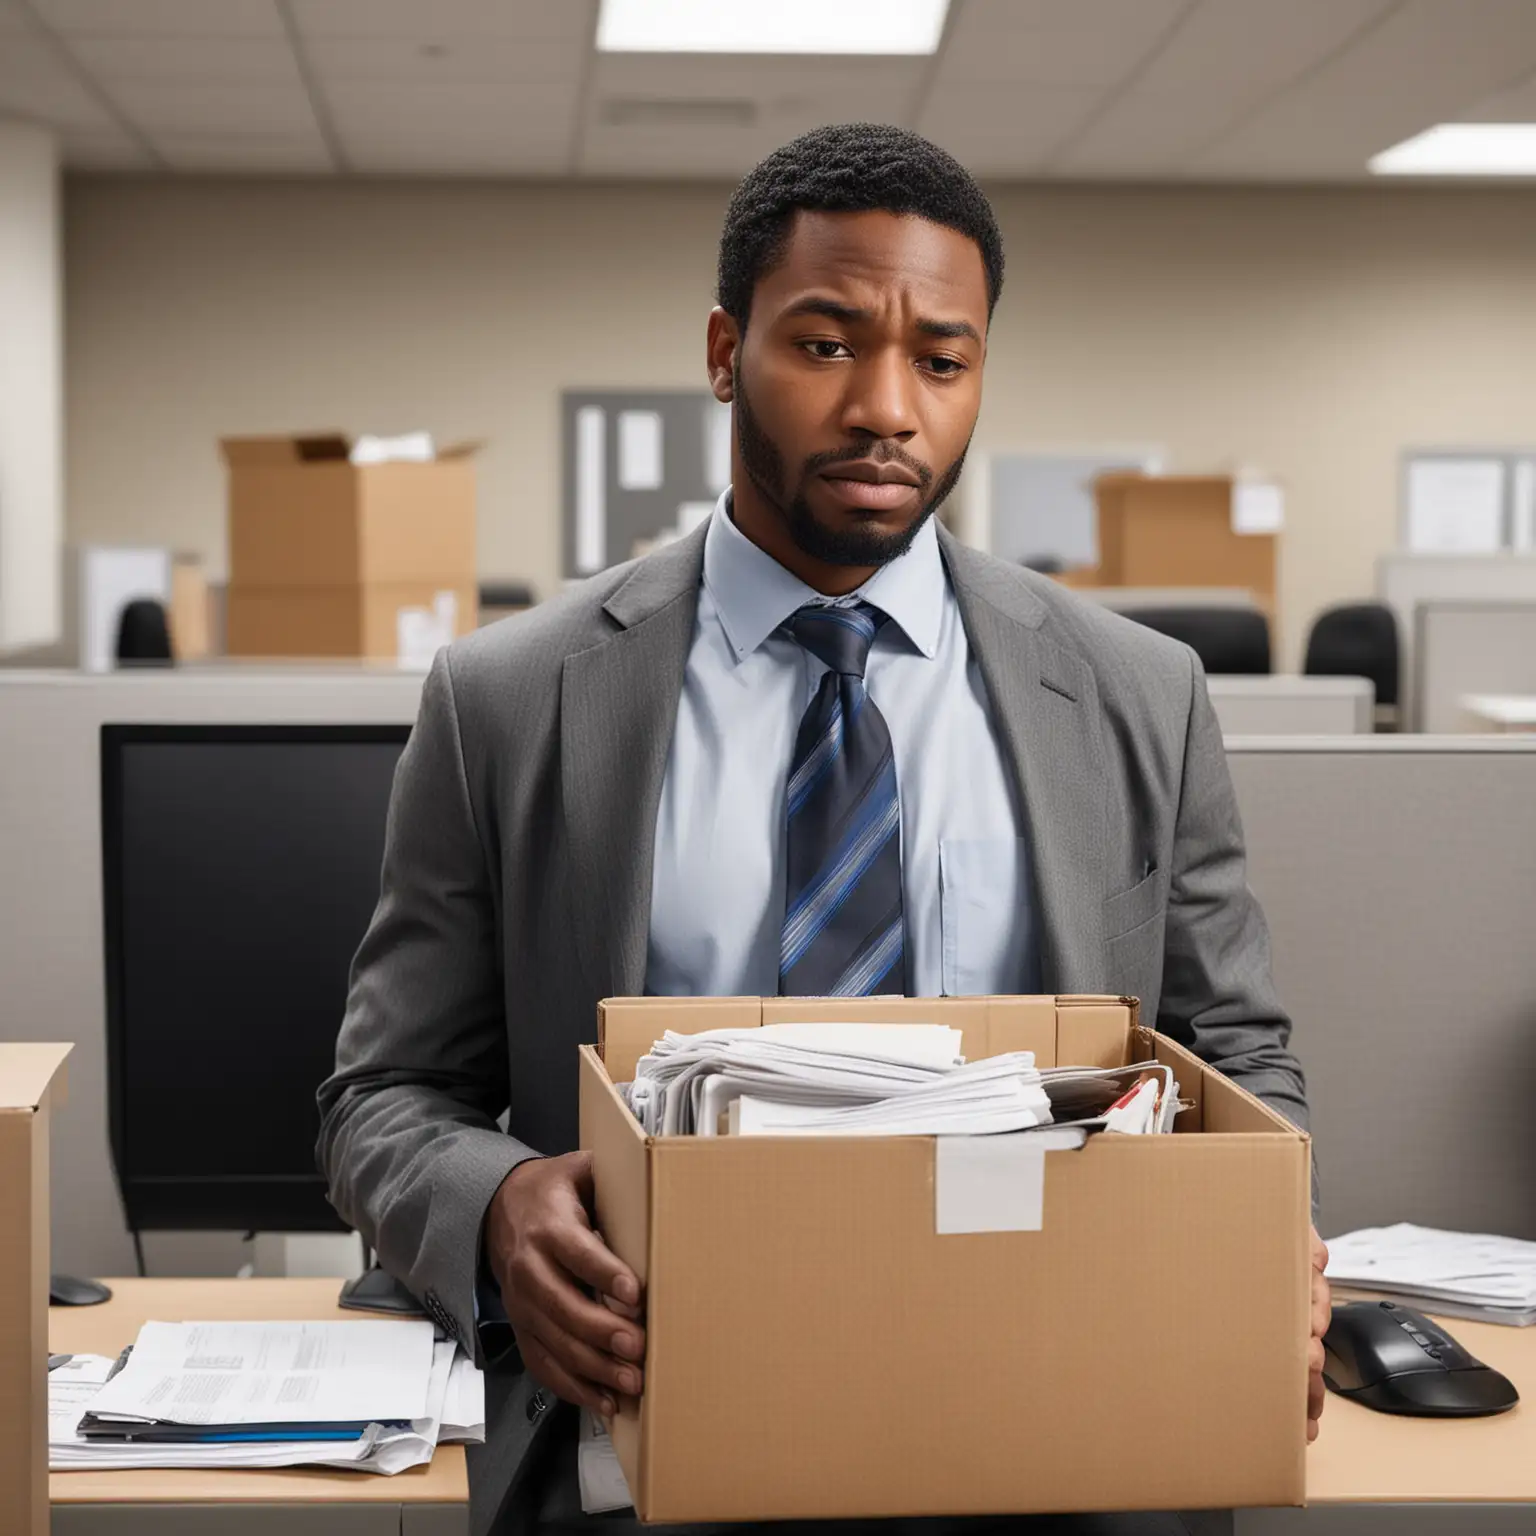 A realistic photograph of a sad black man who just got fired carrying his small box of belongings out of his office cubicle